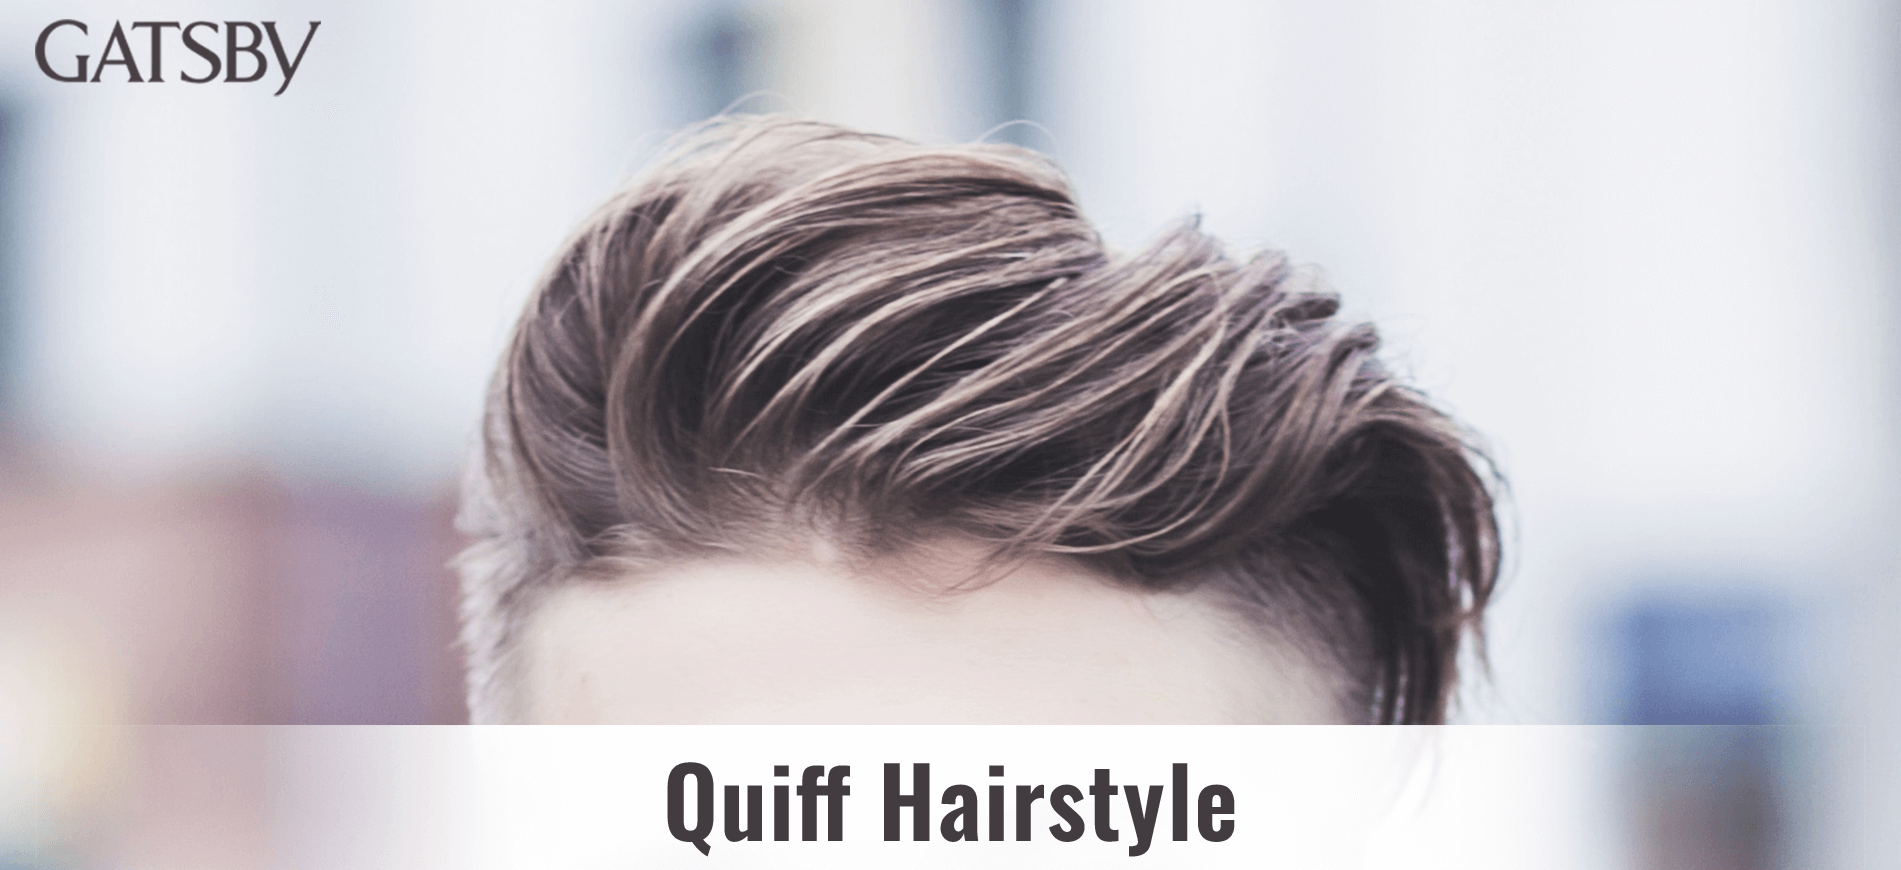 Modern Quiff Hairstyles: 26 Edgy Looks for a Fresh Style